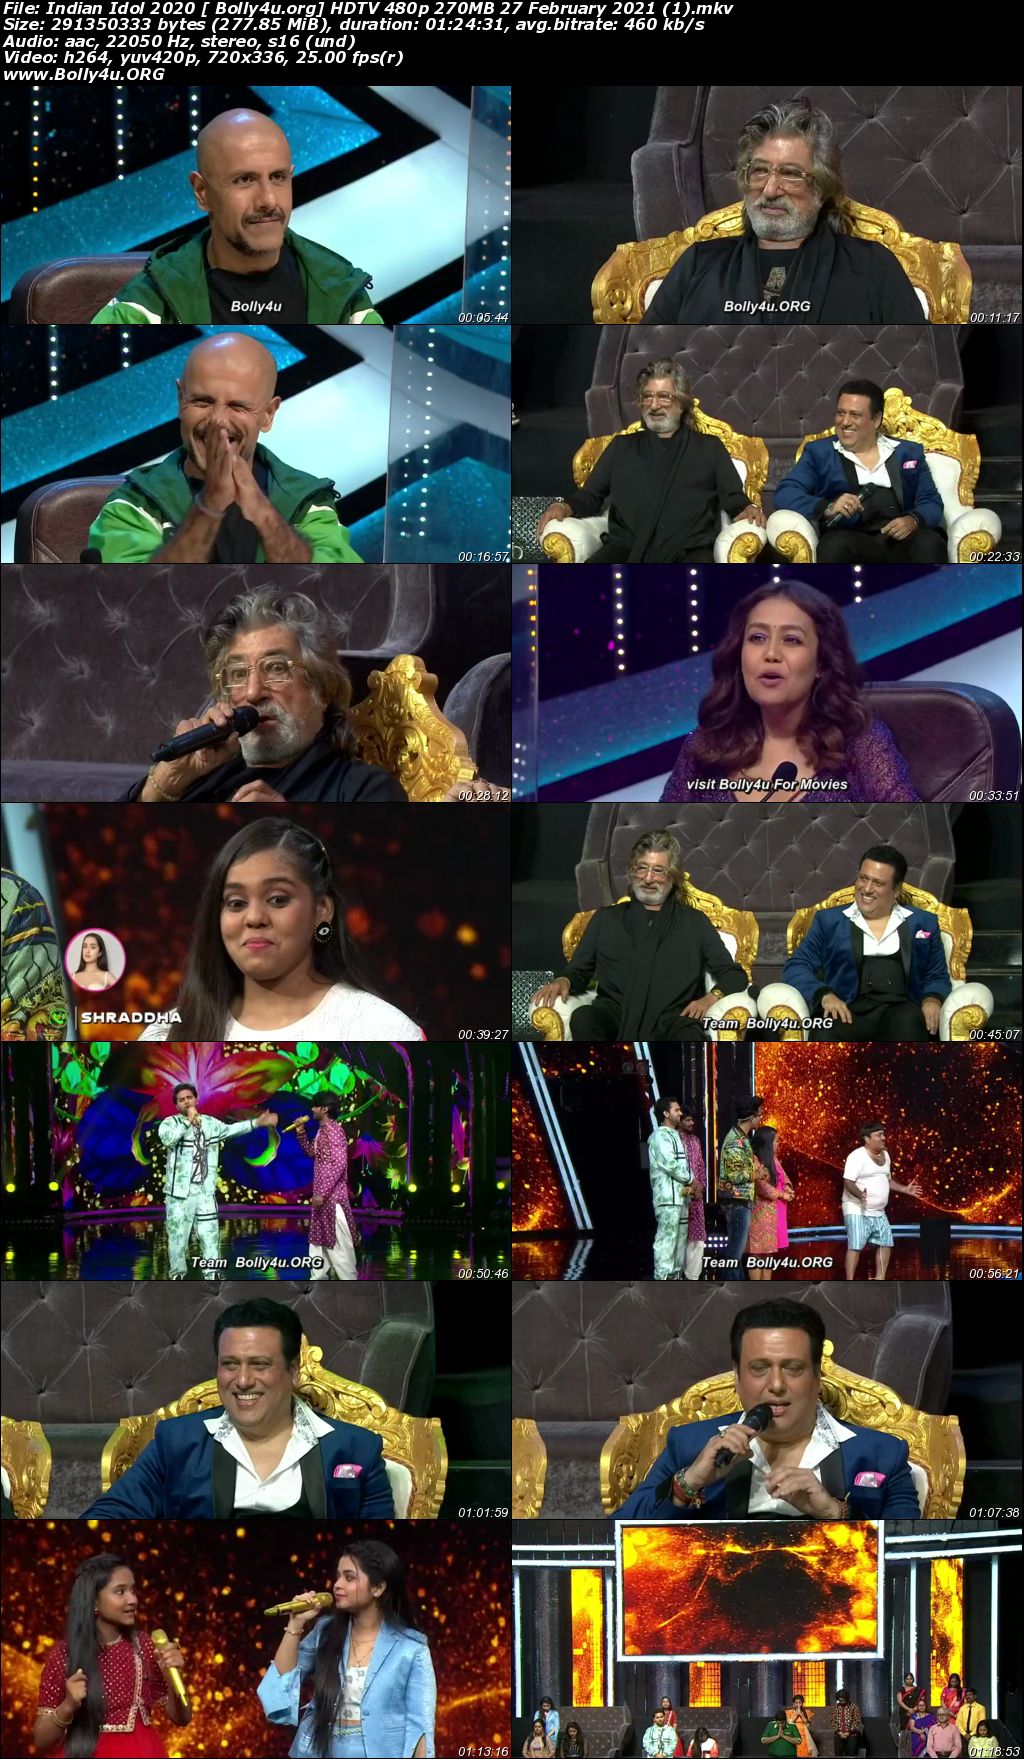 Indian Idol 2020 HDTV 480p 270MB 27 February 2021 Download